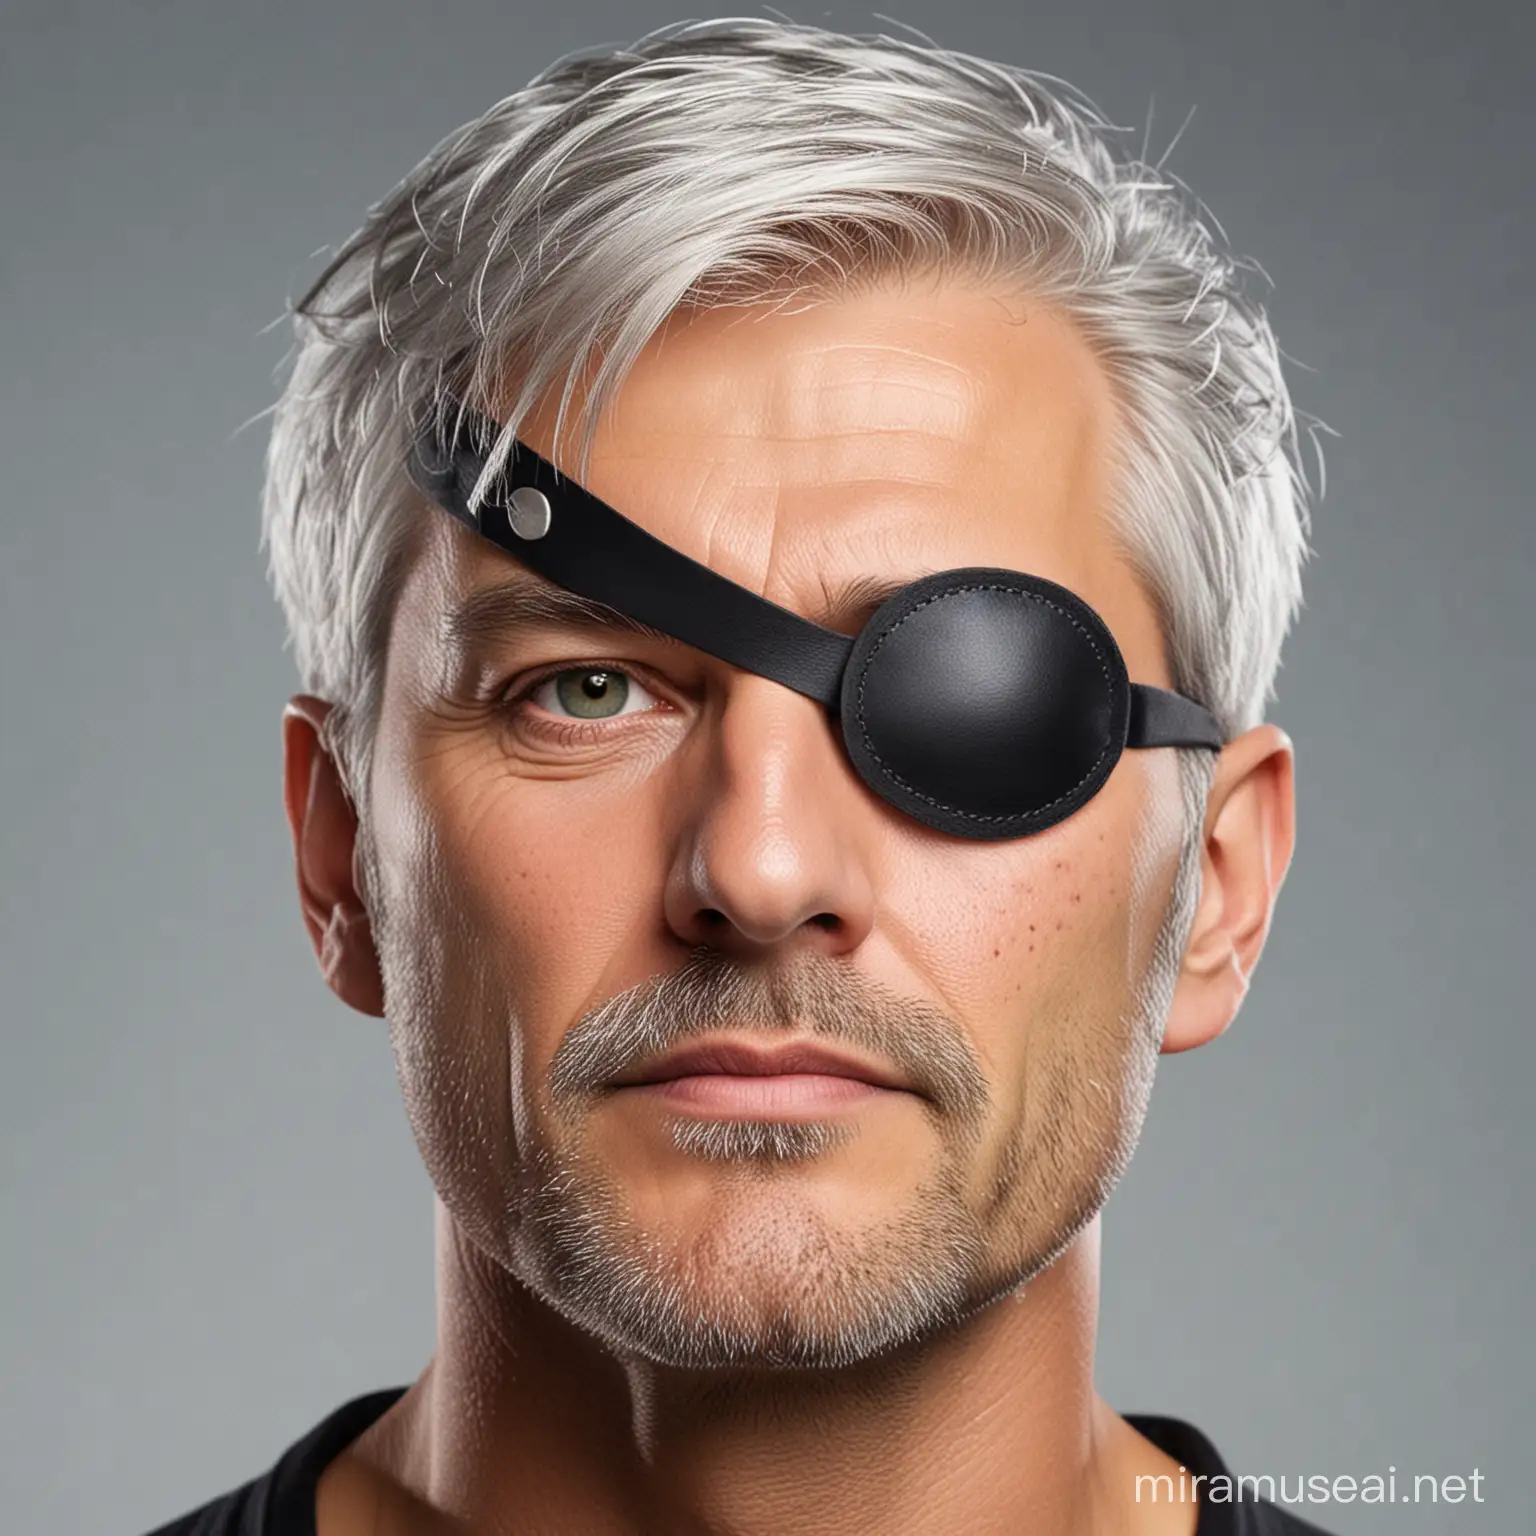 Silver haired man eyepatch